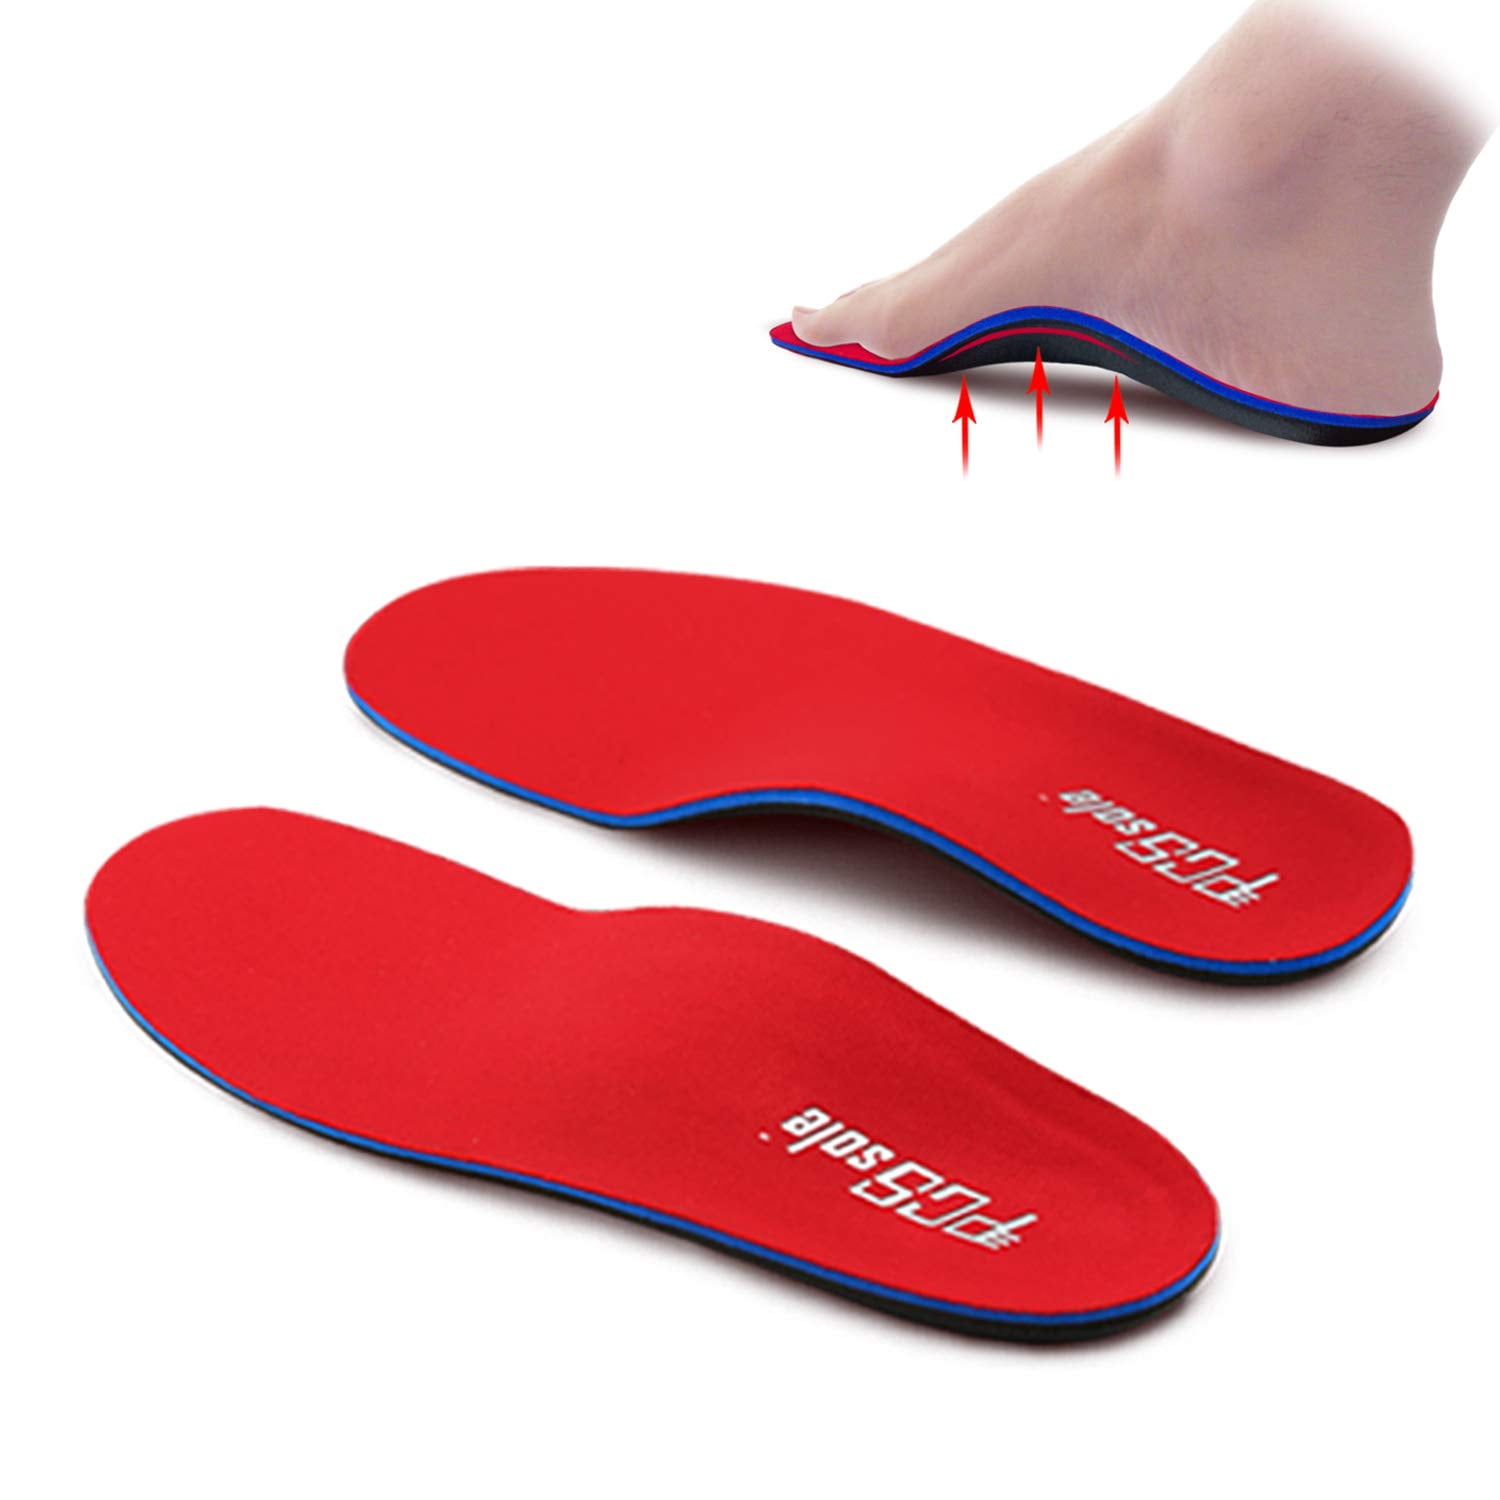 PCSsole Orthotic Arch Support Shoe Inserts Insoles for Flat Feet,Feet Pain,Plantar Fasciitis,Insoles For Men and Women